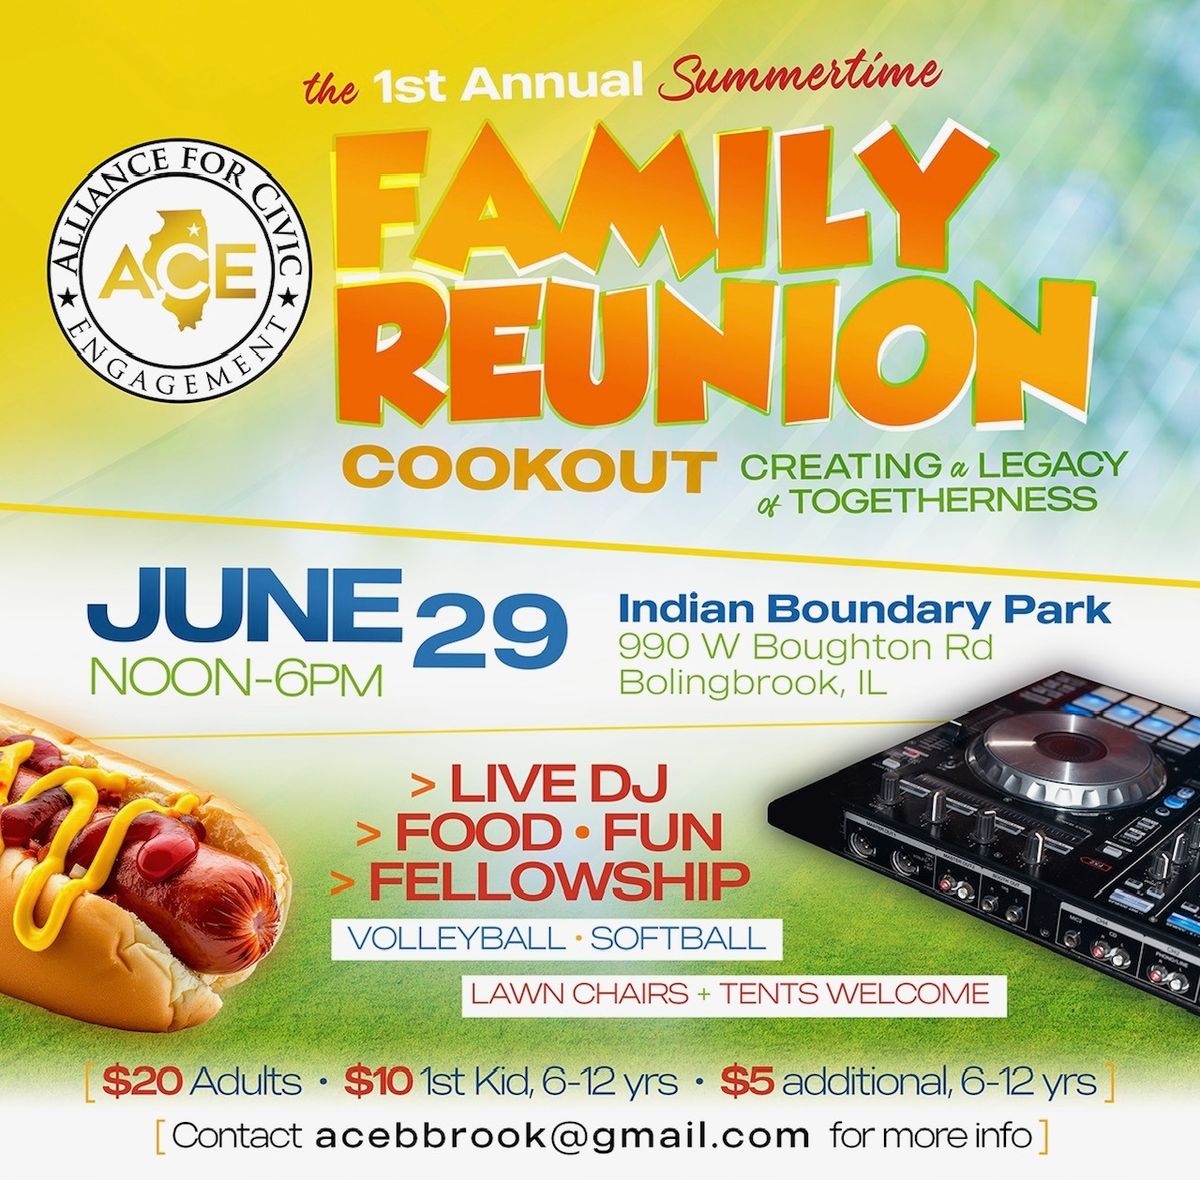 Alliance for Civic Engagement (ACE) - Summertime Family Reunion Cookout